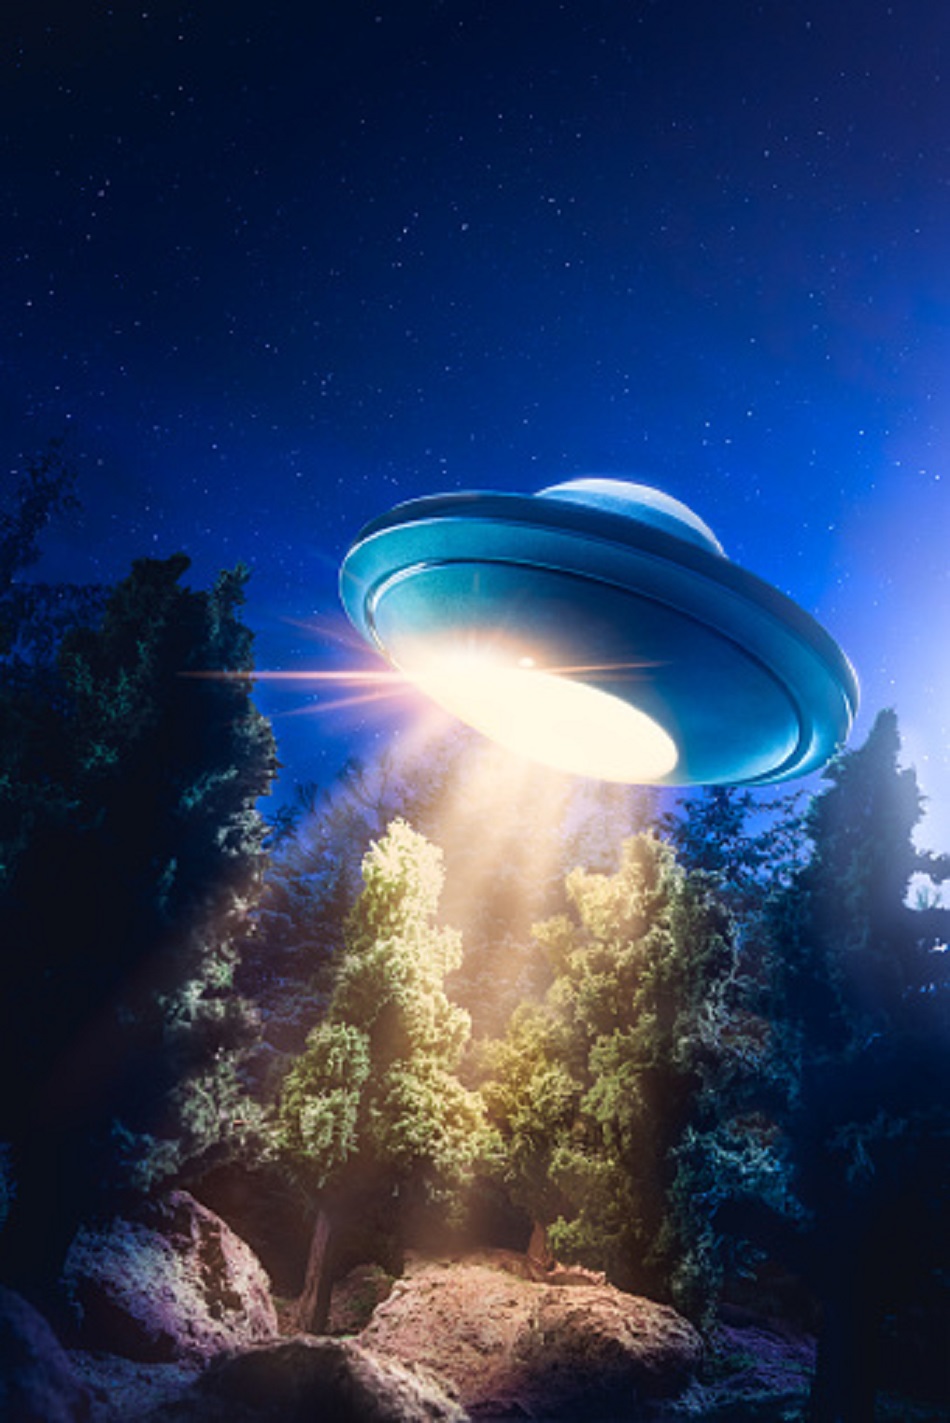 A depiction of a UFO over trees